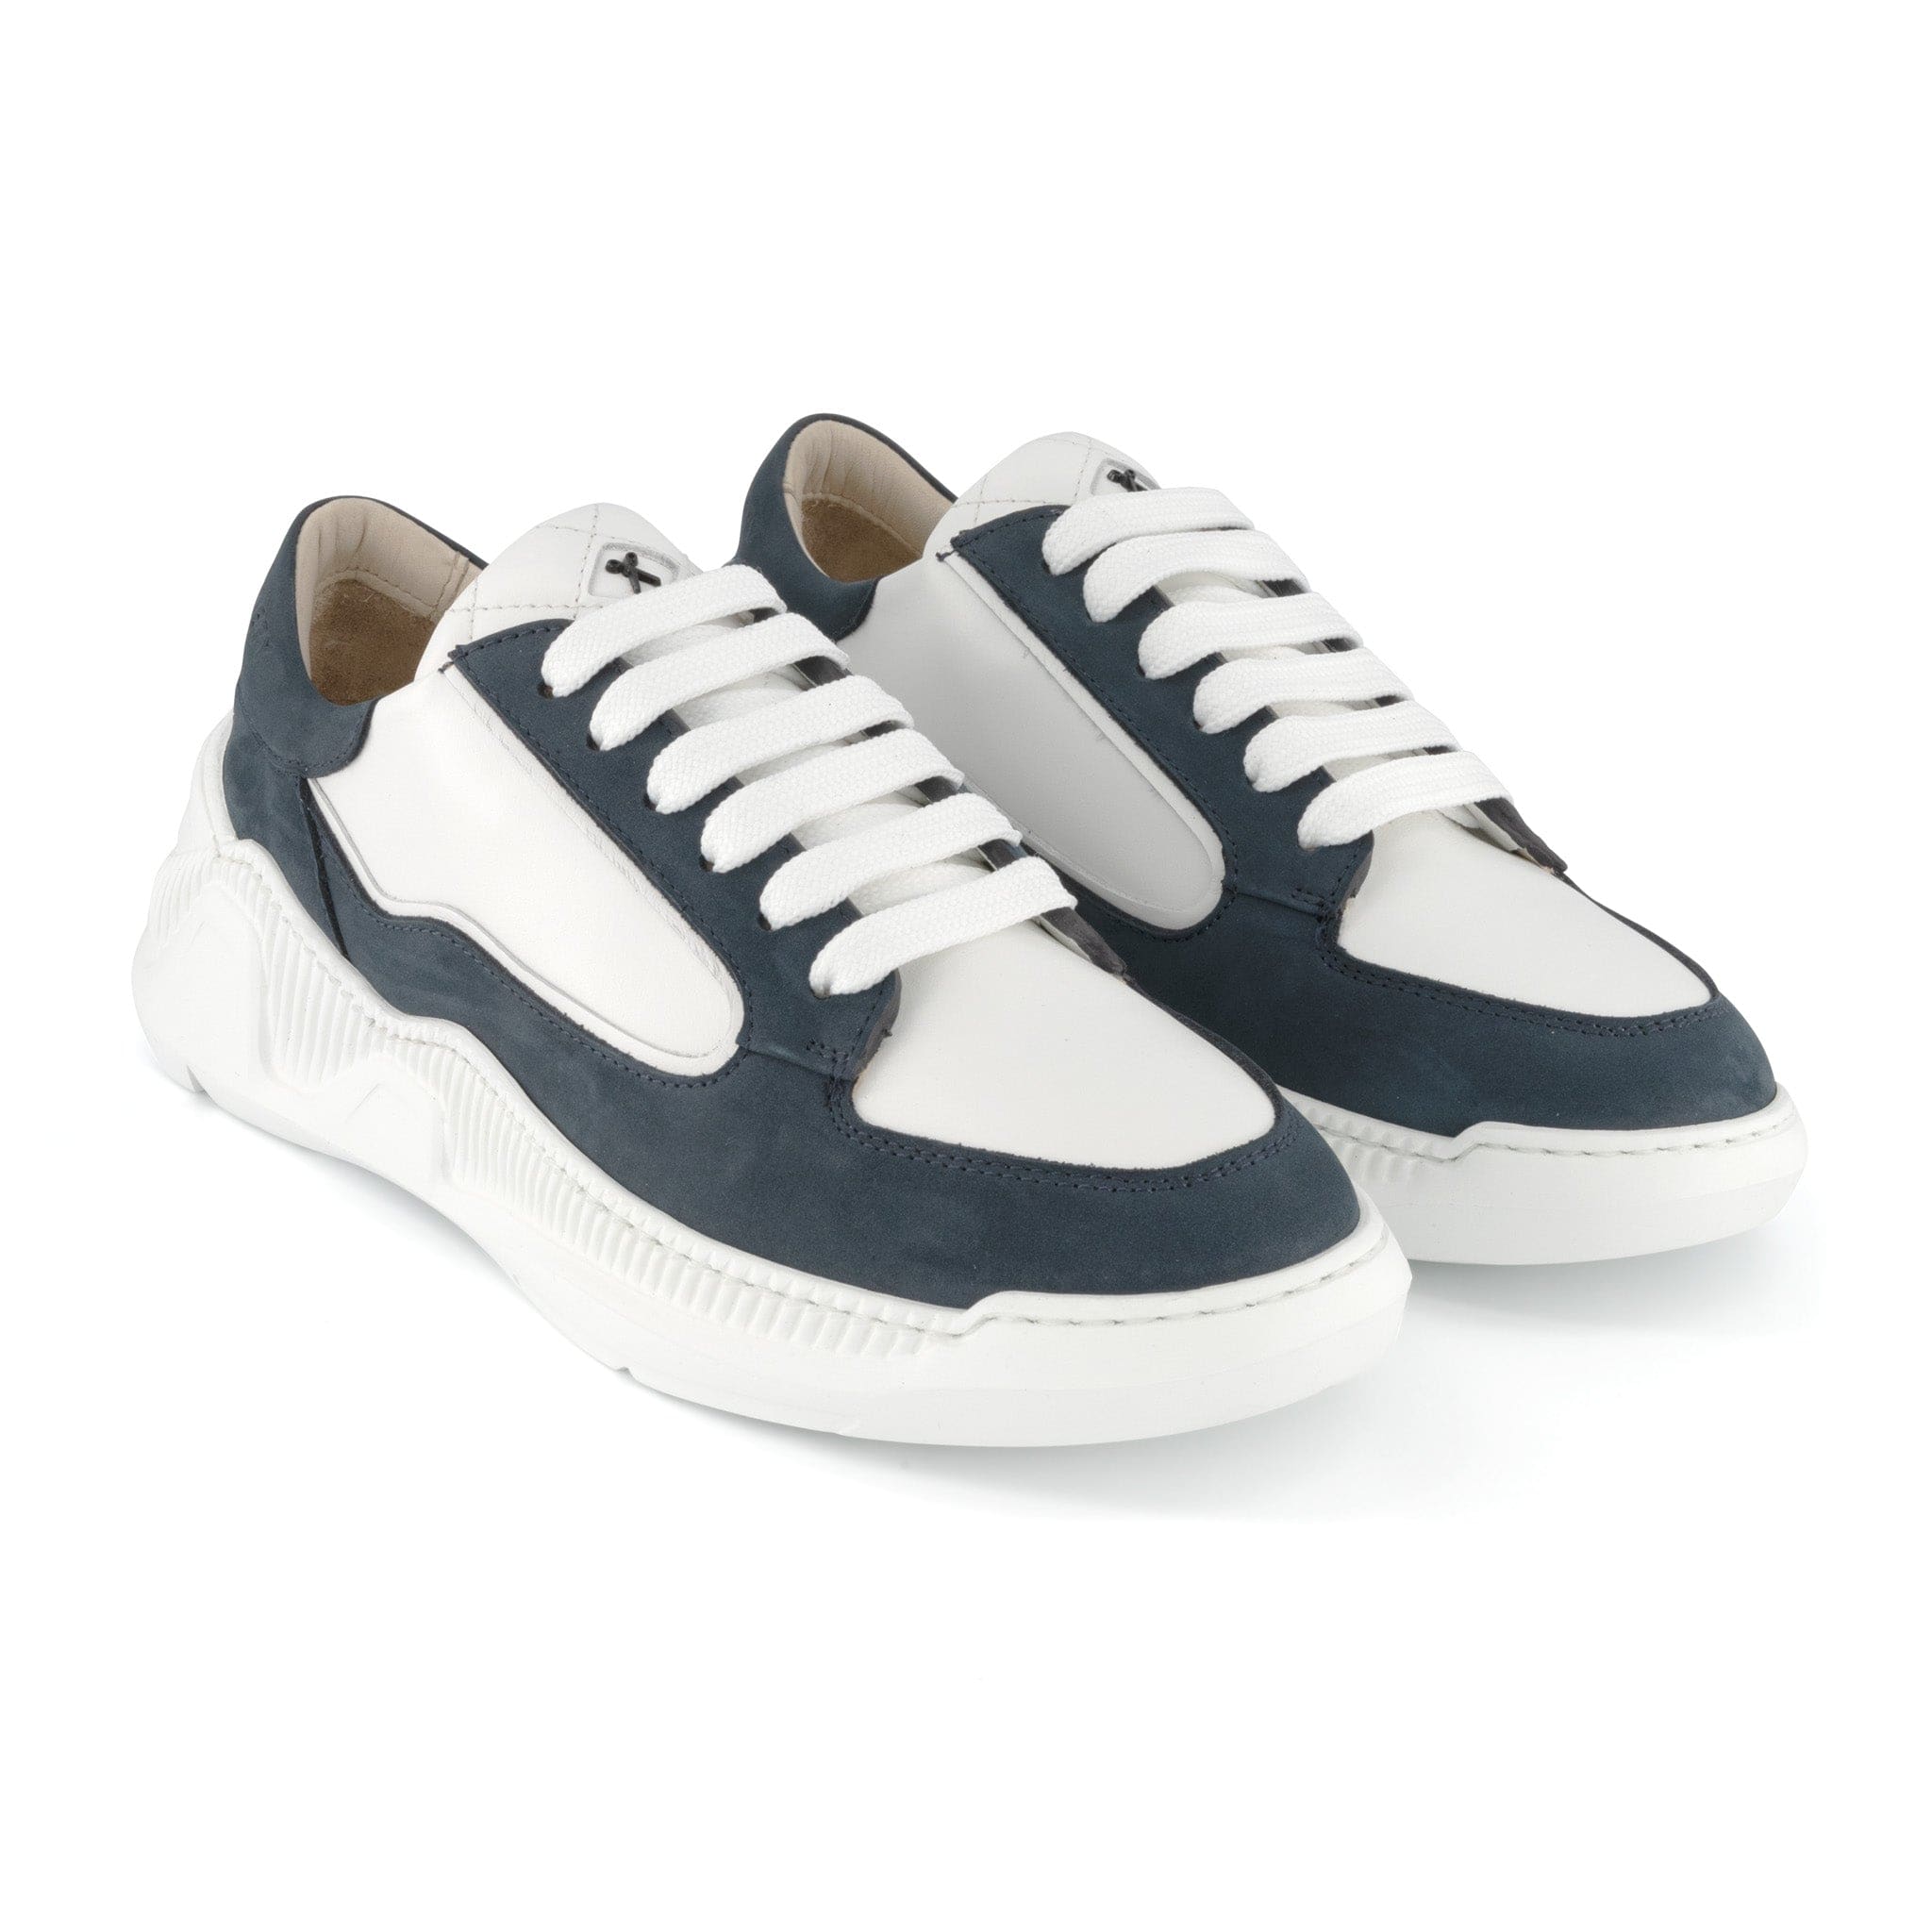 Nesto Low Top Italian Leather Sneaker | Navy and White | White Outsole | Made in Italy